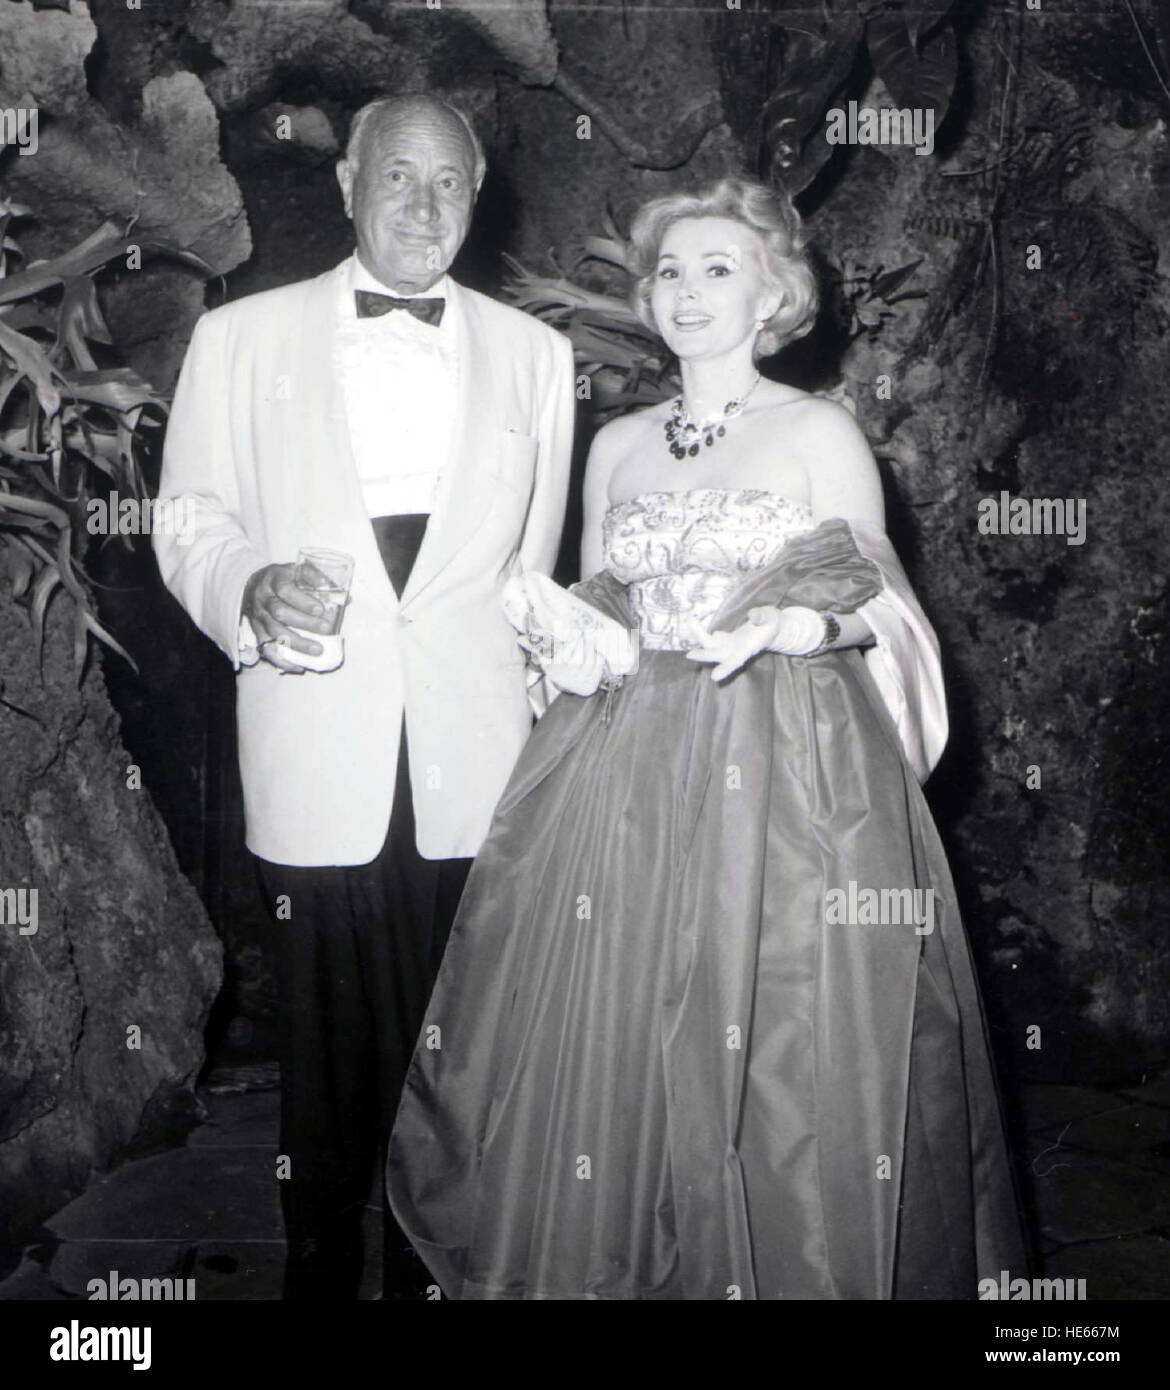 ZSA ZSA GABOR (born Sari Gabor, February 6, 1917 - December 18, 2016) was a Hungarian-American actress and socialite. Miss Hungary in 1936 emigrated to the United States in 1941, and became a sought-after actress. Outside of her acting career, Gabor was best known for her extravagant Hollywood lifestyle, glamorous personality, and her many marriages. She had nine husbands, including hotel magnate Conrad Hilton and actor George Sanders. PICTURED: ZSA ZSA GABOR and husband CONRAD HILTON in the 1940's. © Globe Photos/ZUMAPRESS.com/Alamy Live News Stock Photo